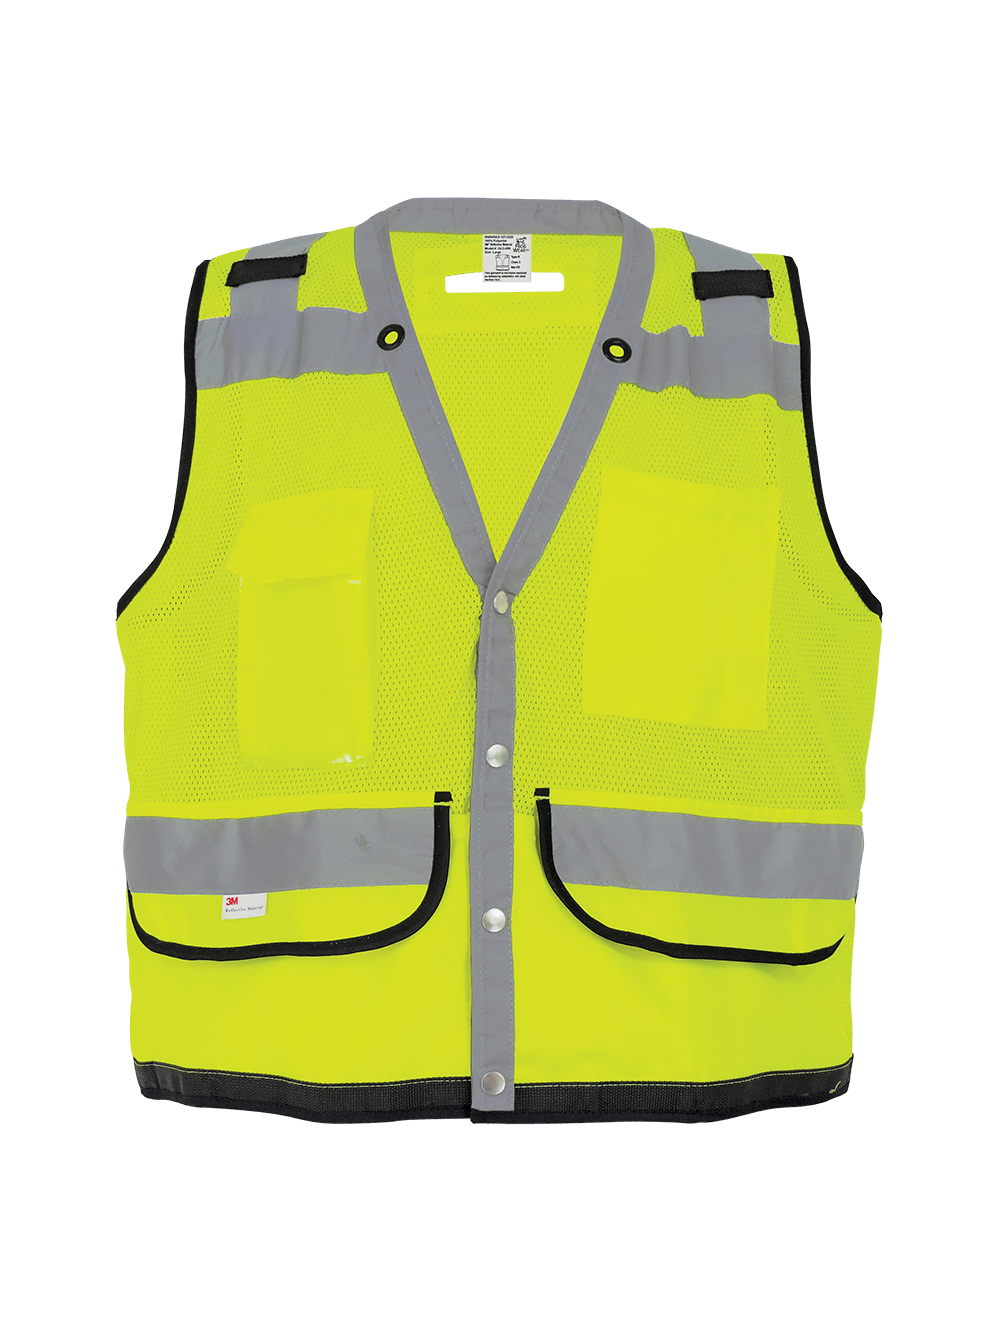 FrogWear® HV Lightweight High-Visibility Yellow/Green Mesh and Solid Surveyors Safety Vest - GLO-059